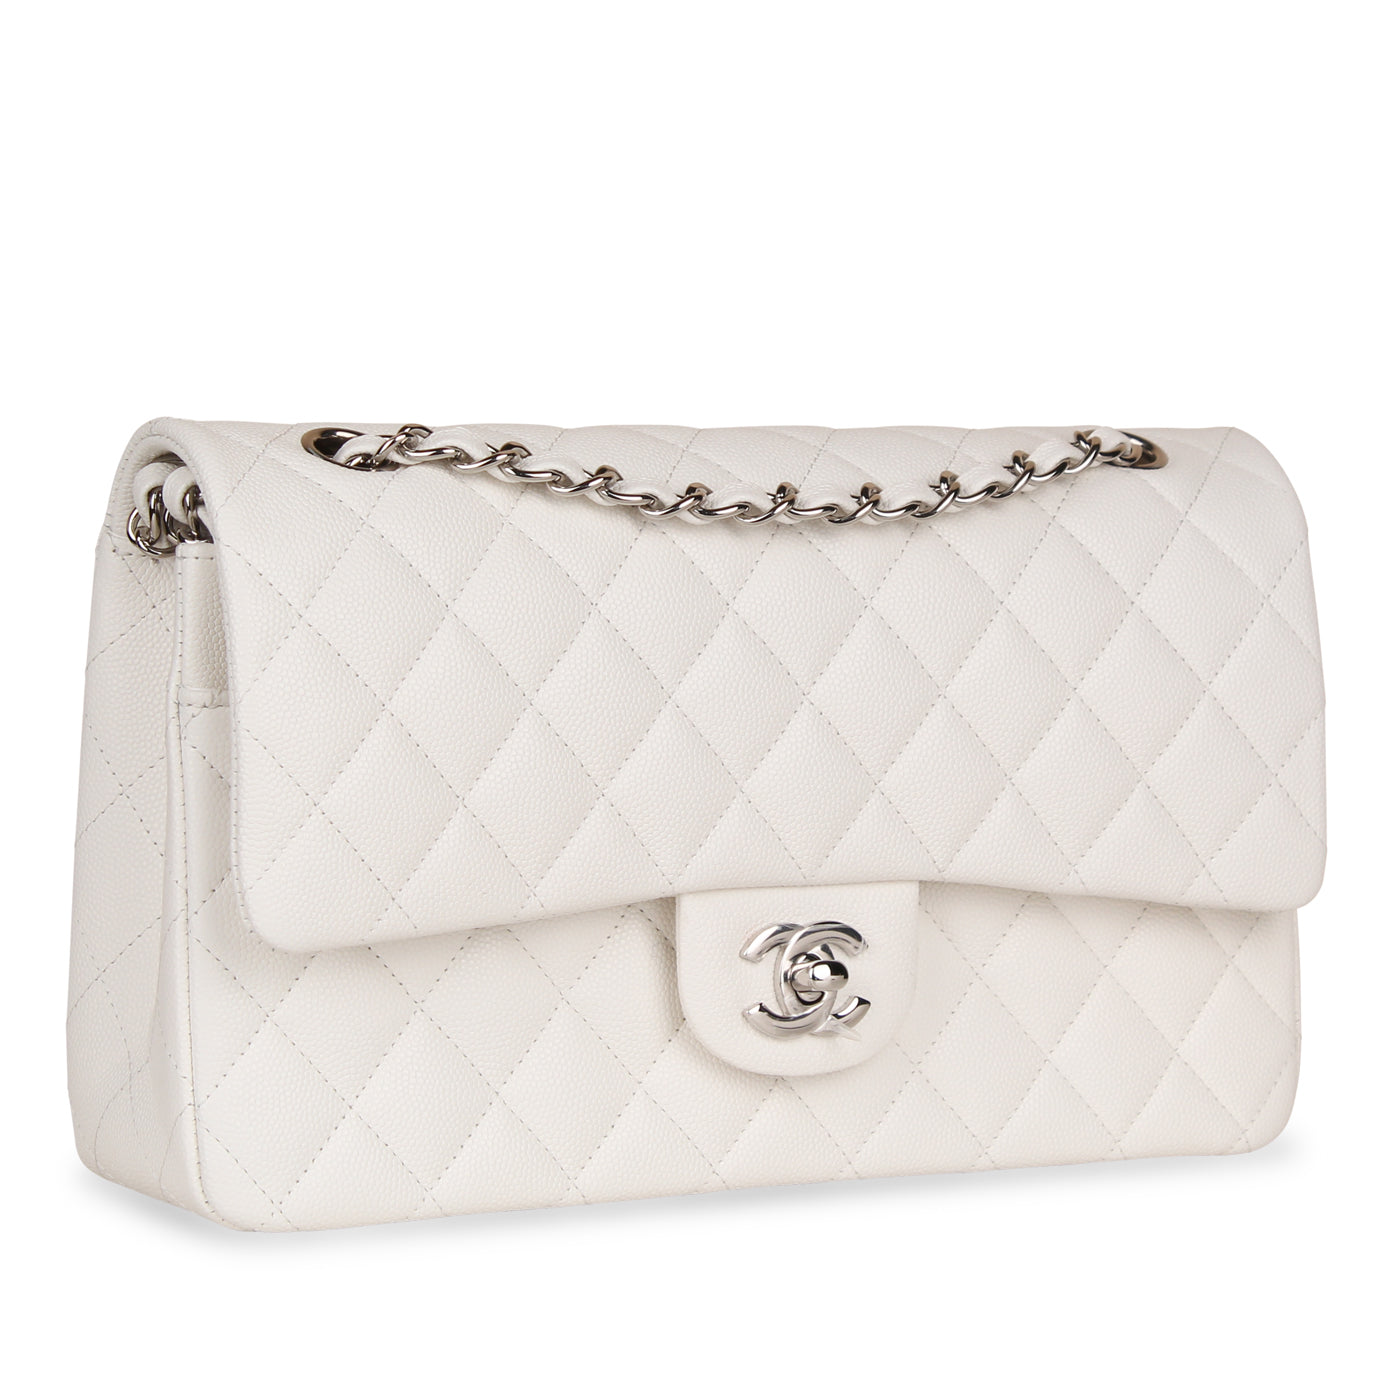 Small flap bag with top handle Shiny lambskin  goldtone metal white   Fashion  CHANEL